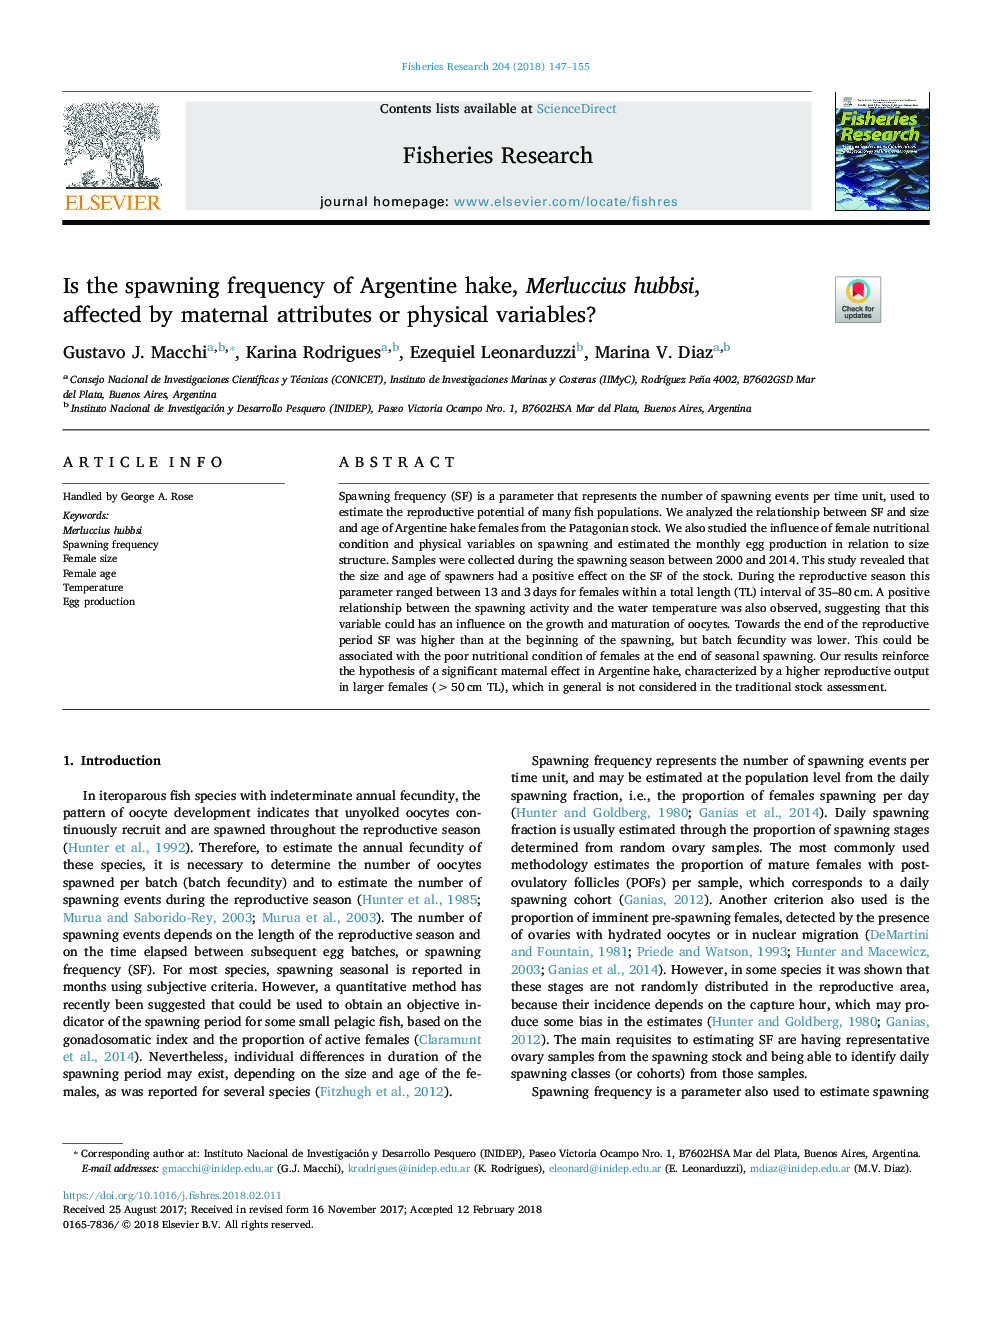 Is the spawning frequency of Argentine hake, Merluccius hubbsi, affected by maternal attributes or physical variables?